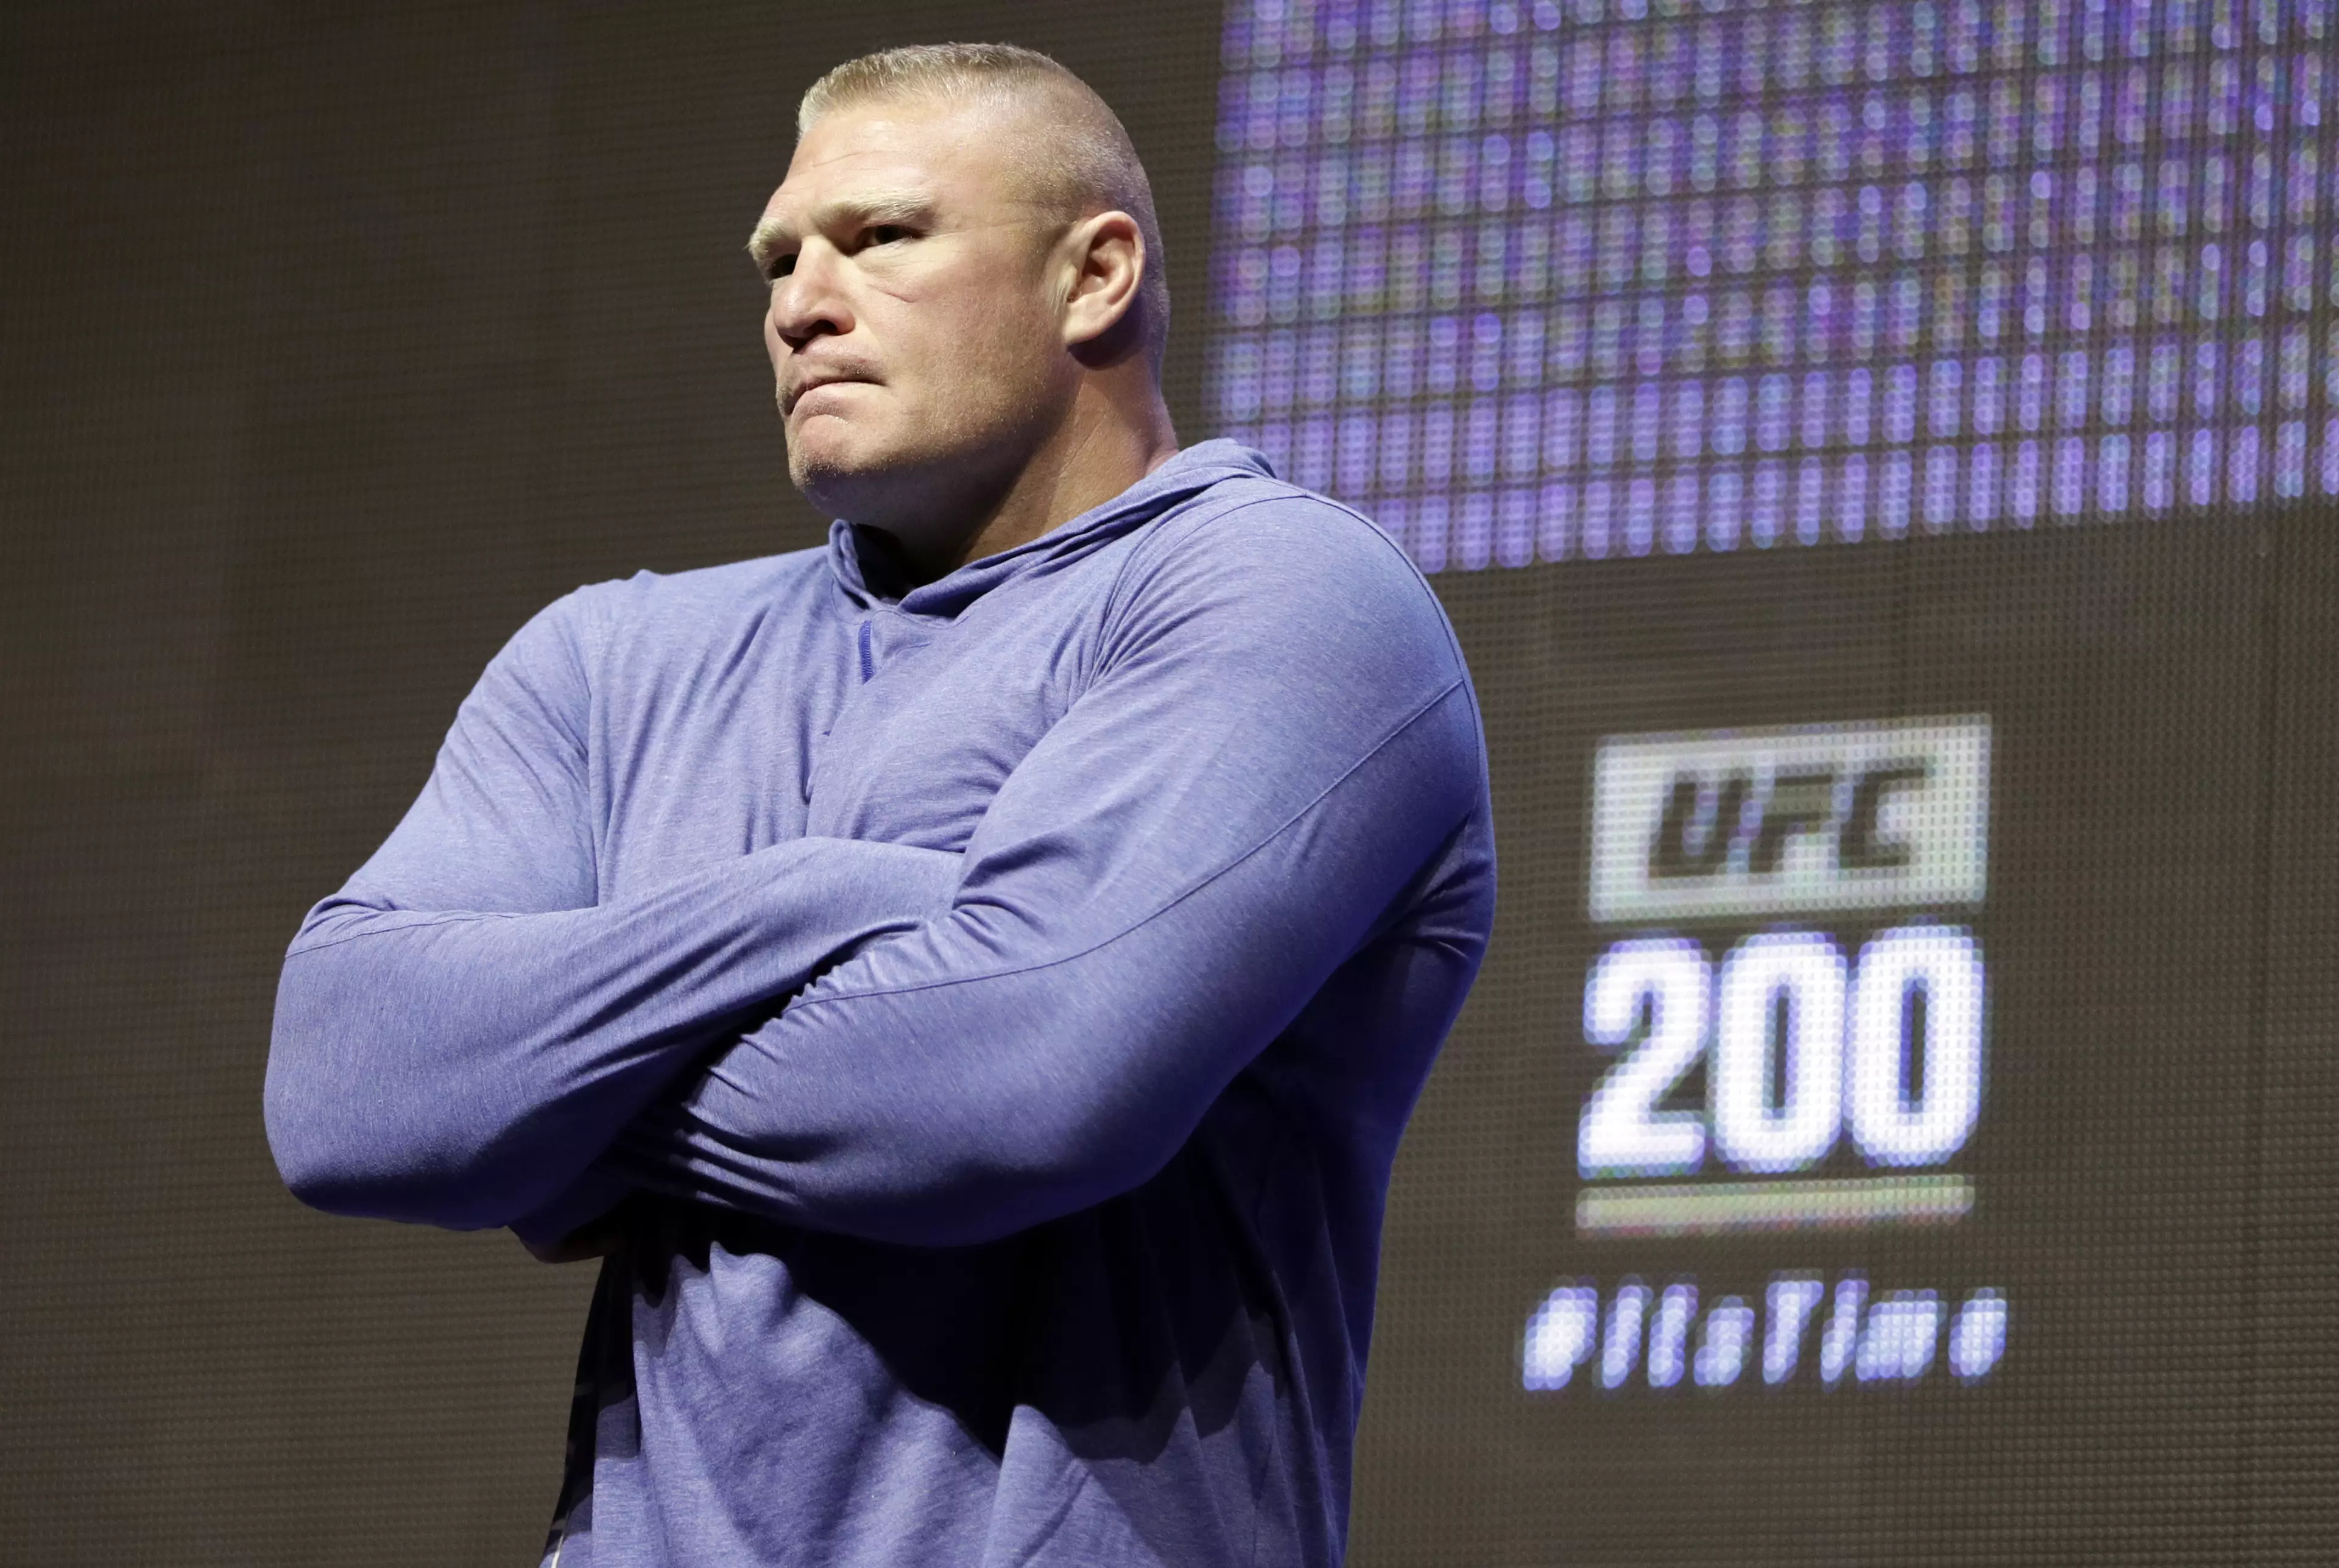 Brock Lesnar Reacts To Jon Jones Pull Out In Typical Fashion